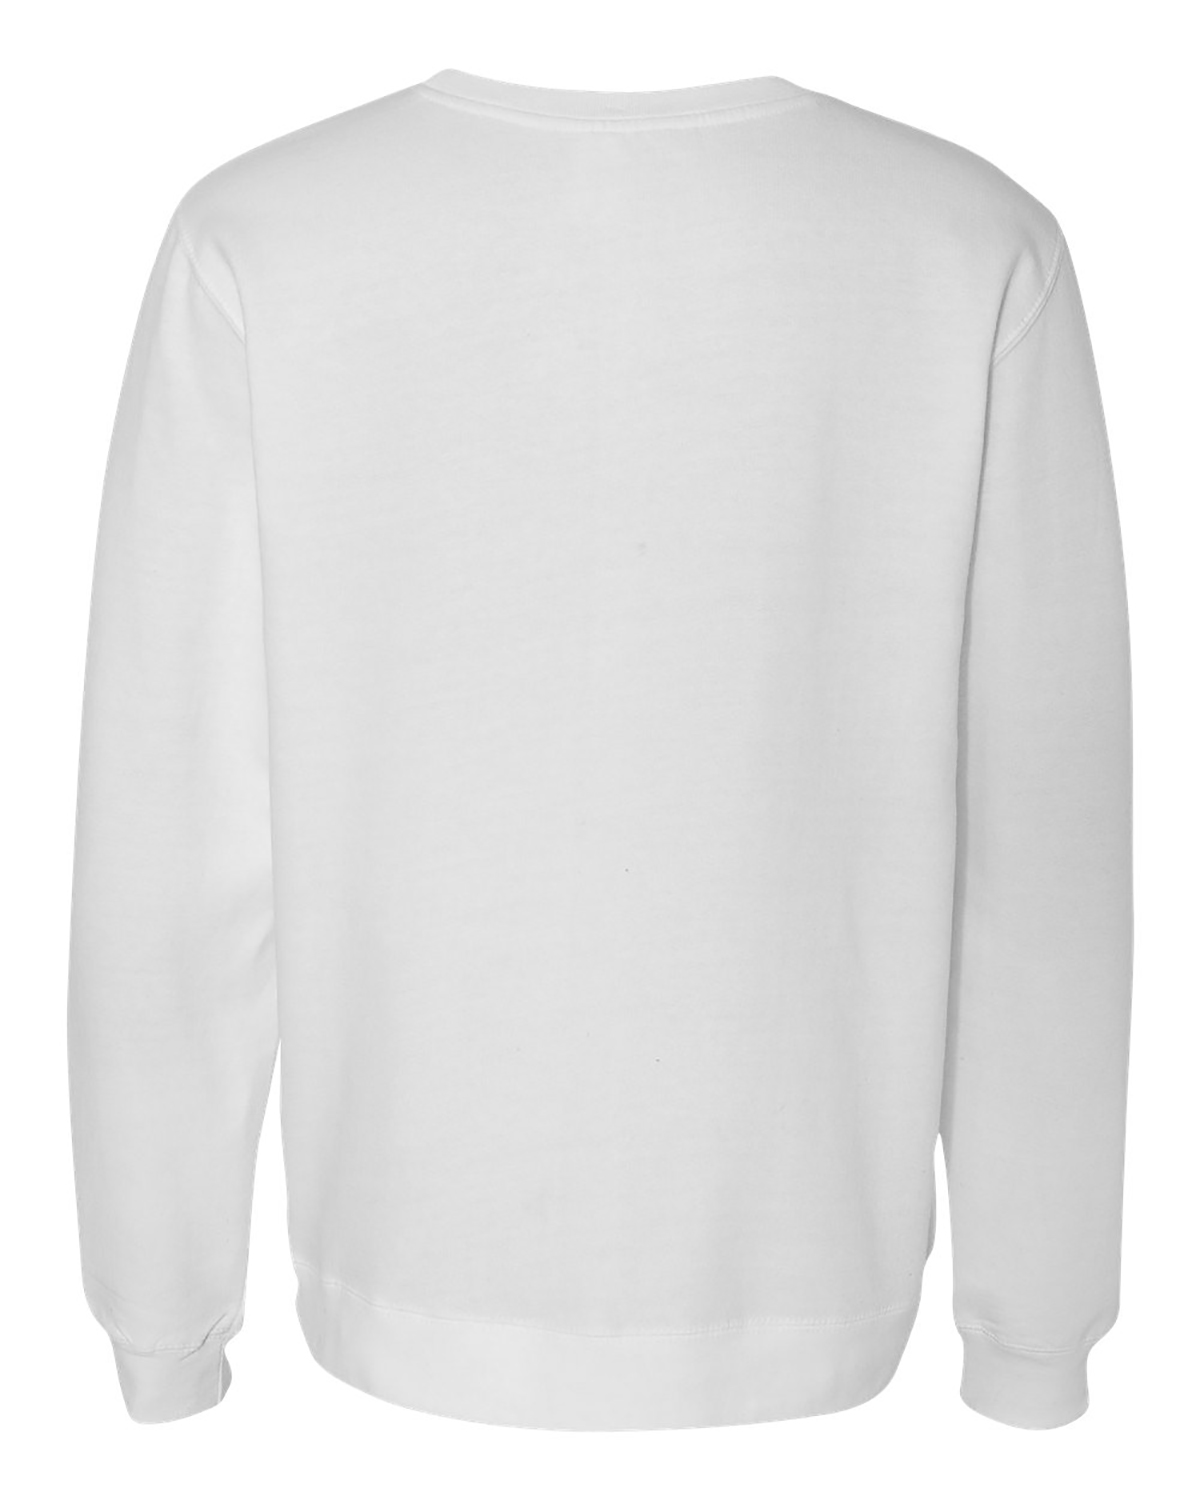 Wholesale Independent Trading Co. SS3000 | Buy Midweight Crewneck ...